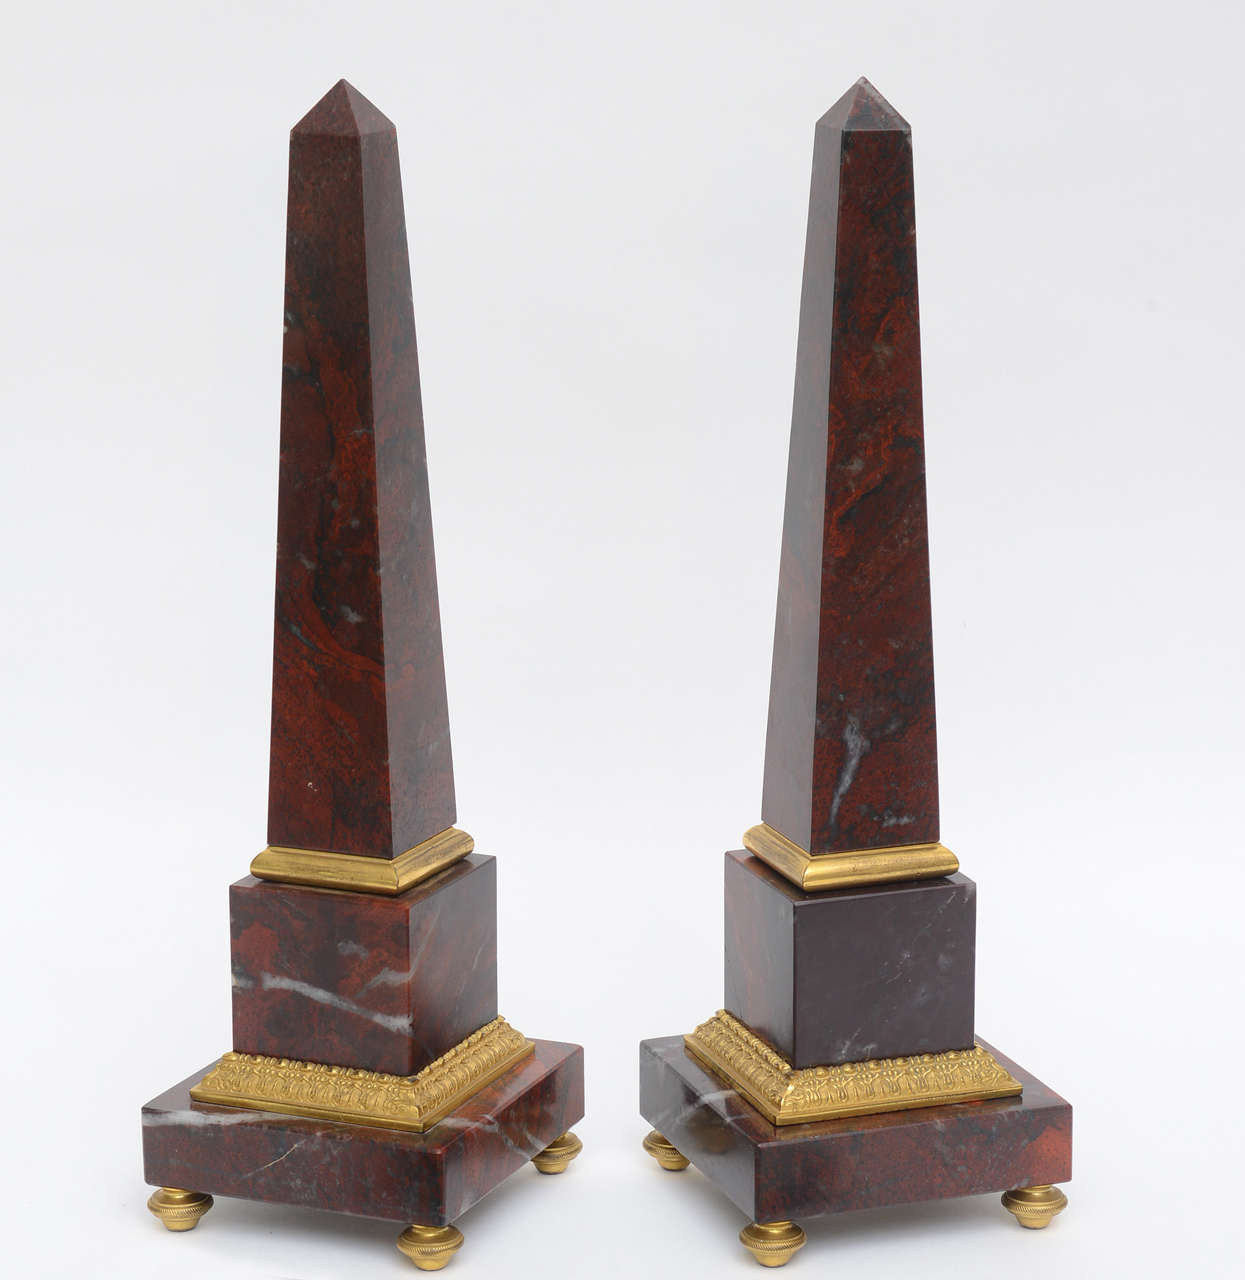 Neoclassical Pair of Antico Rosso Marble Obelisks